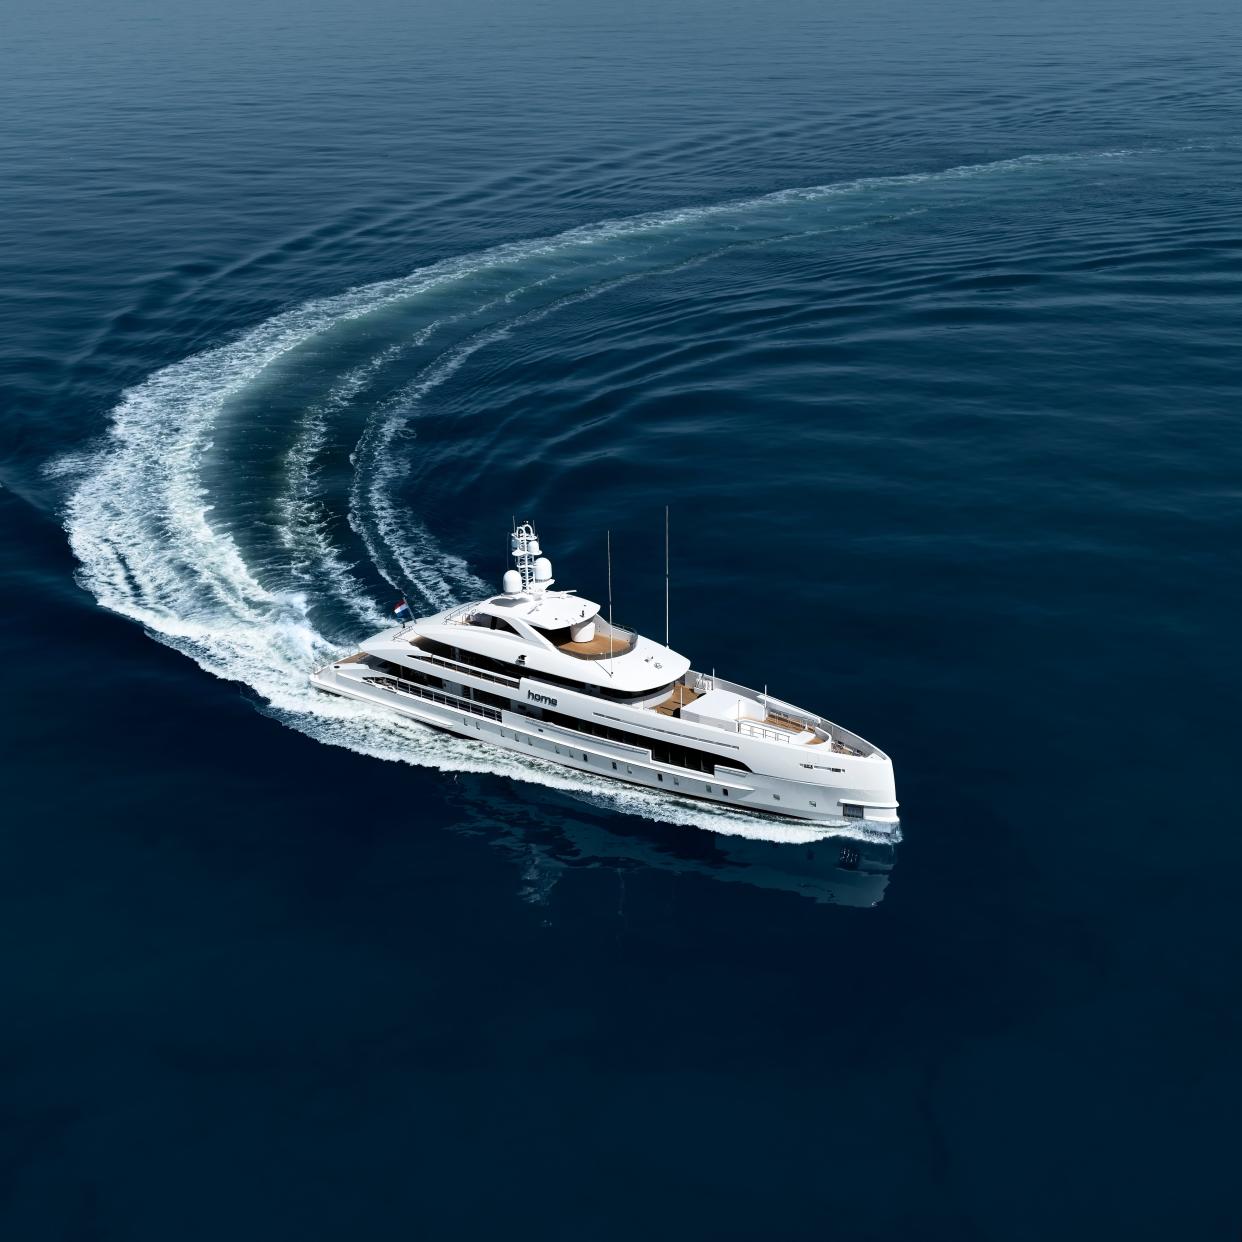 HOME, Heesen's 'stealth superyacht' - Dick Holthuis Photography